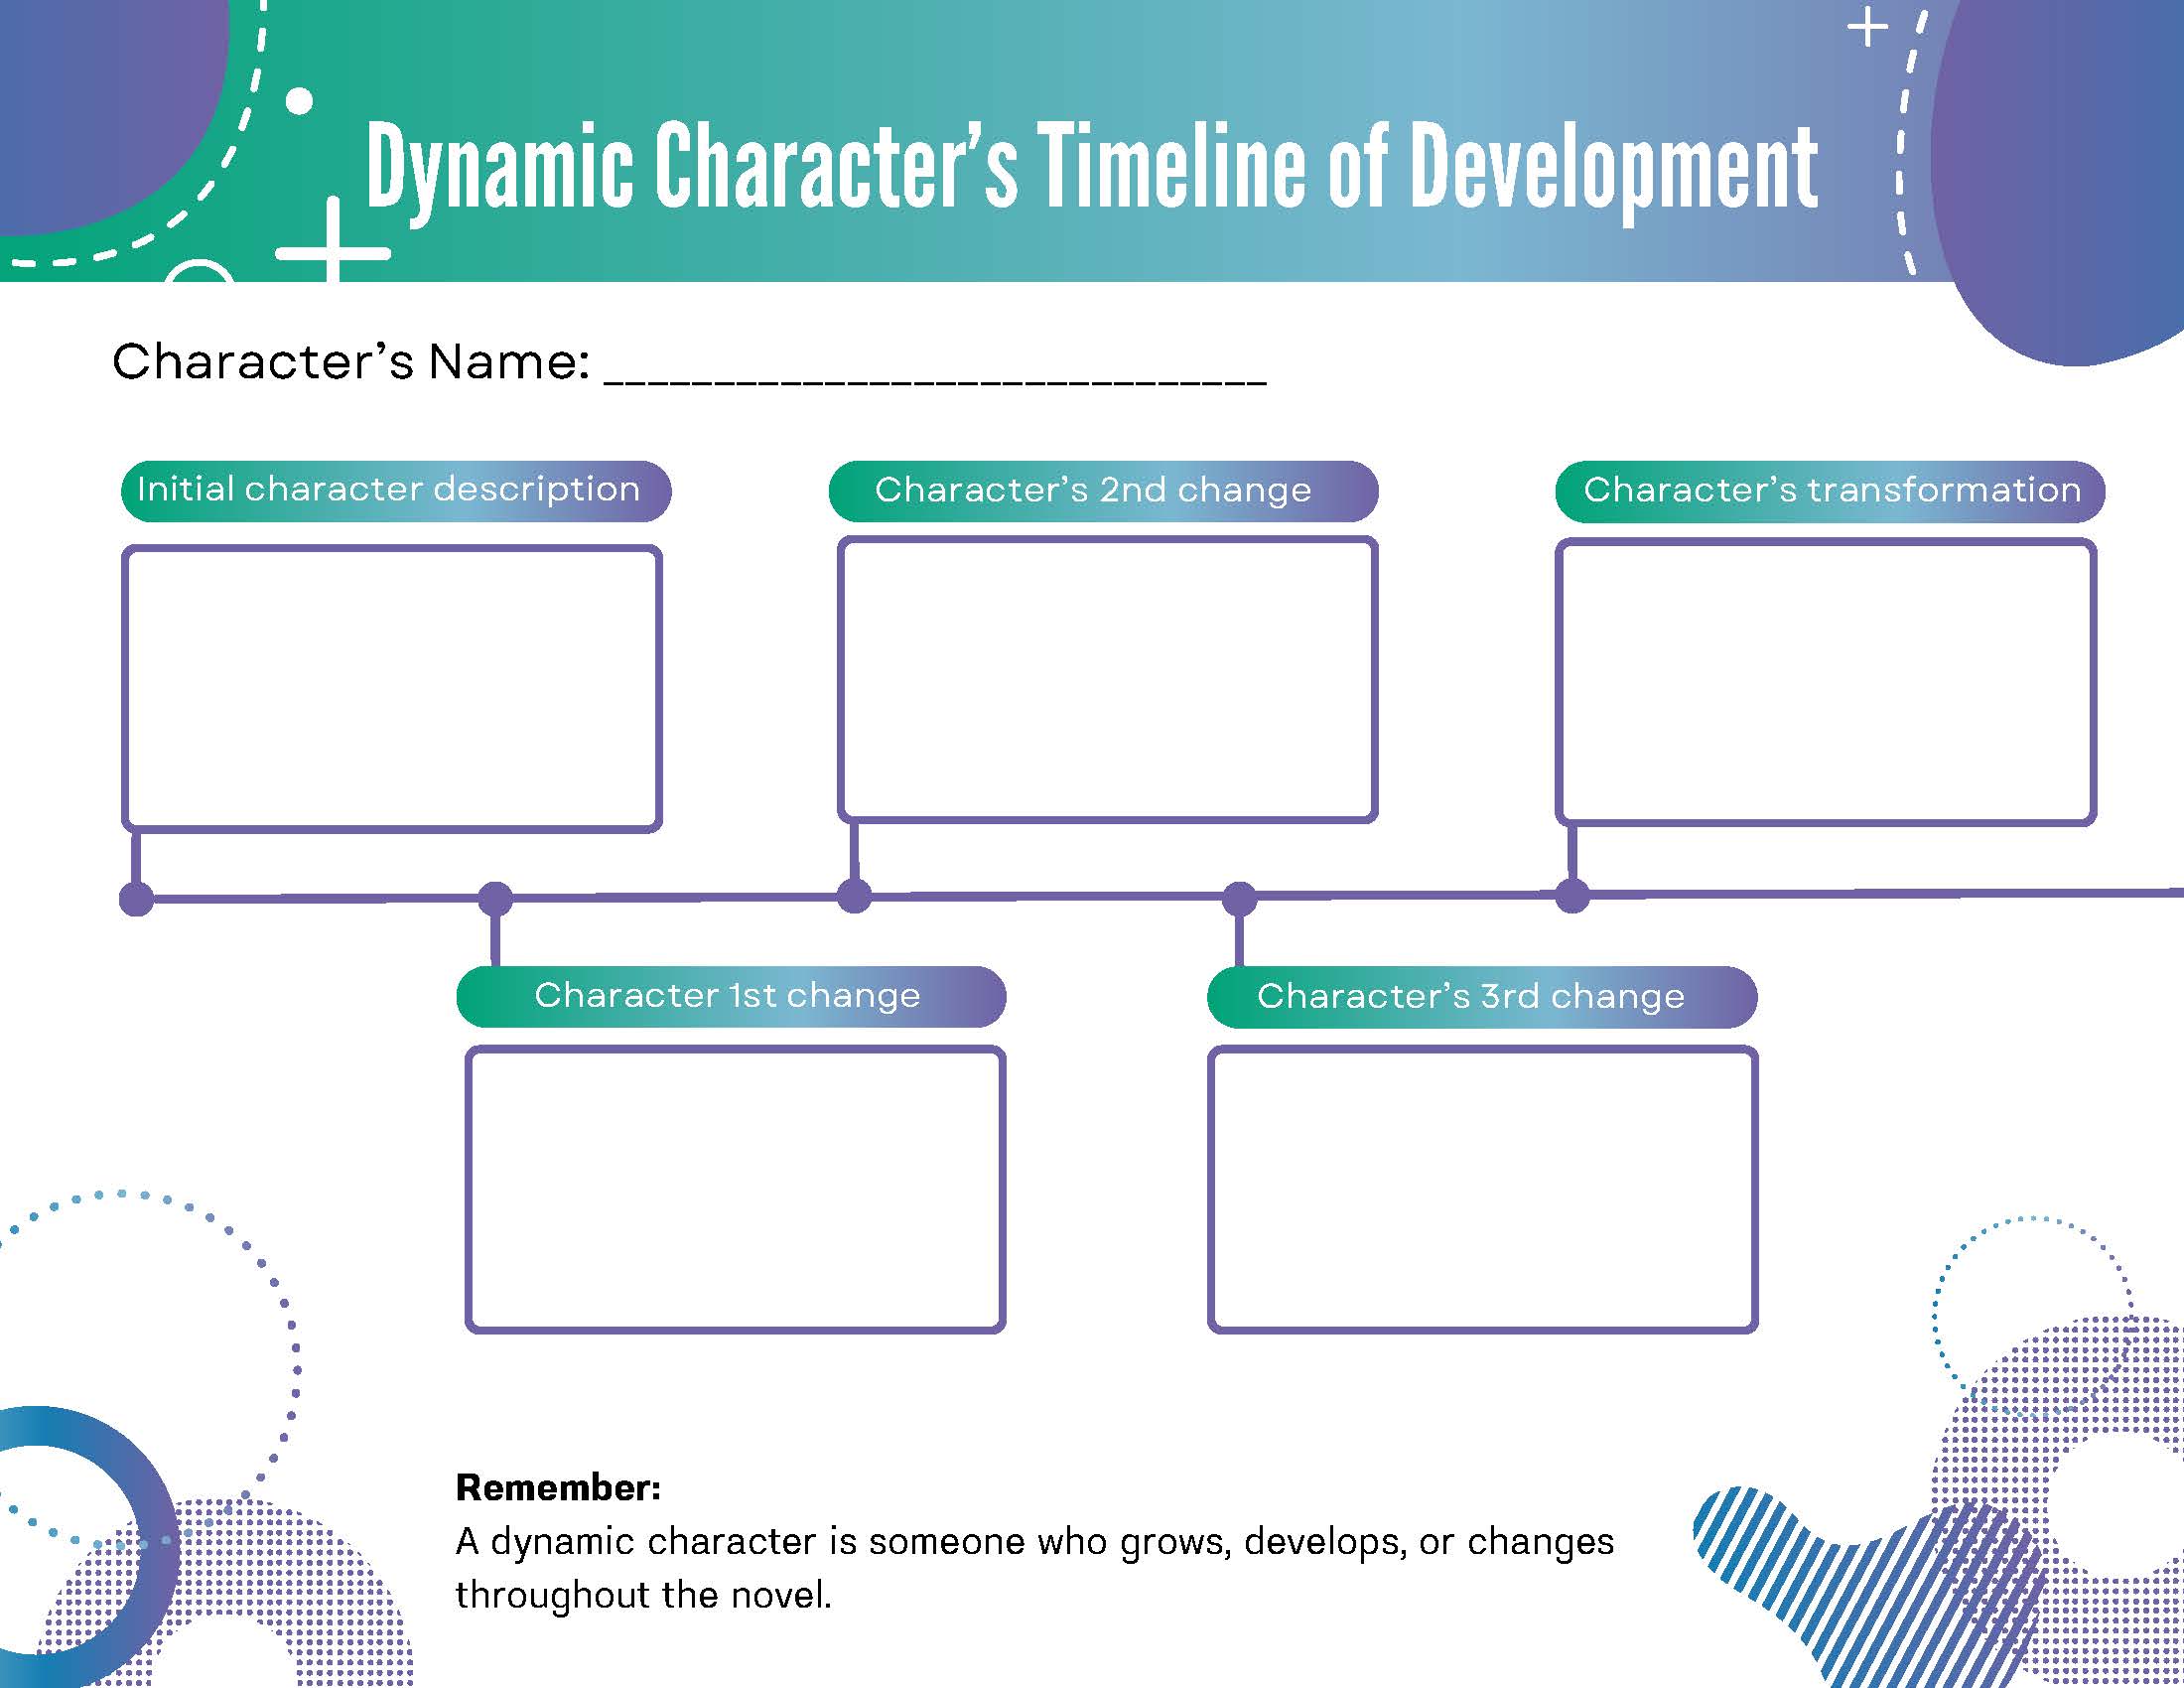 Dynamic Character Timeline